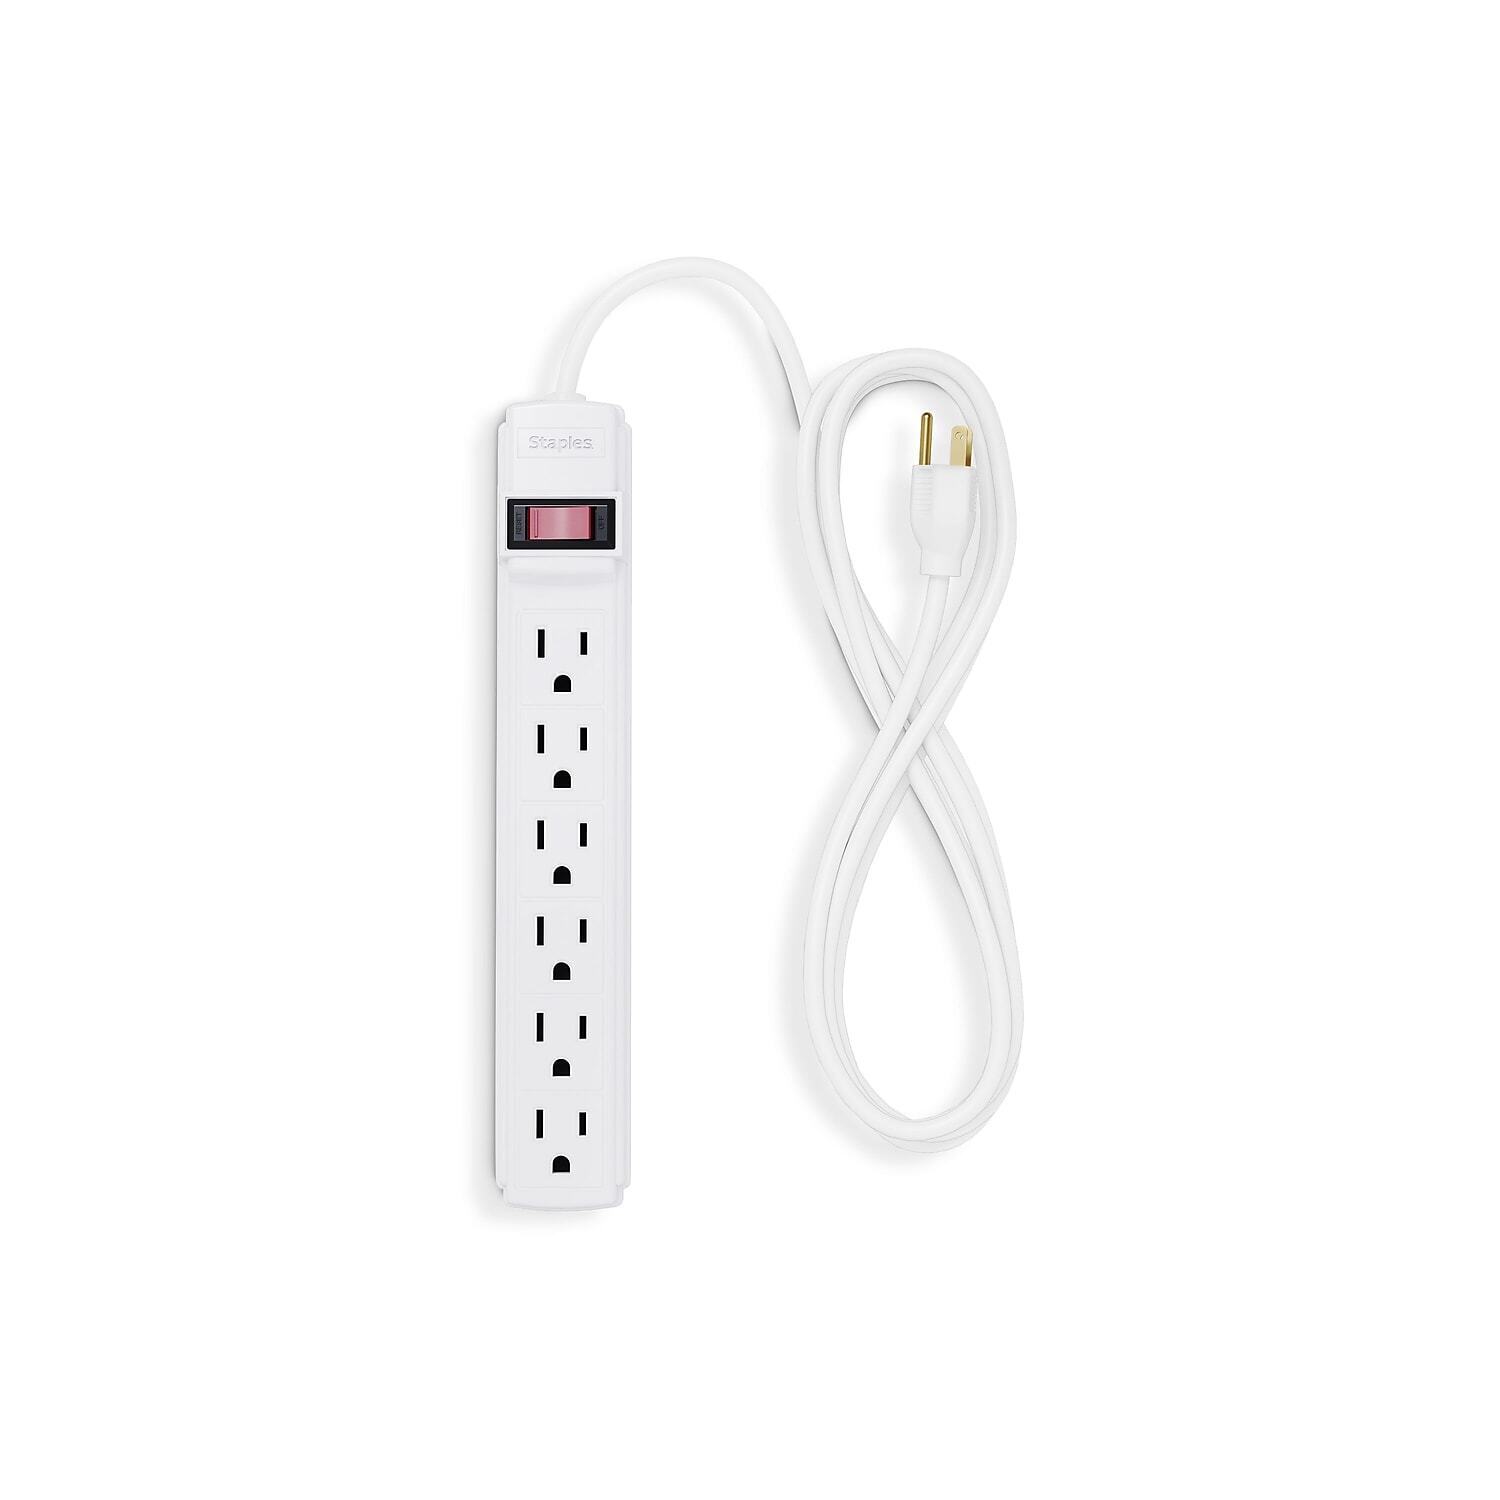 Staples 15' Cord 6-Outlet Power Strip White 2/Pack ST17649-CCVS